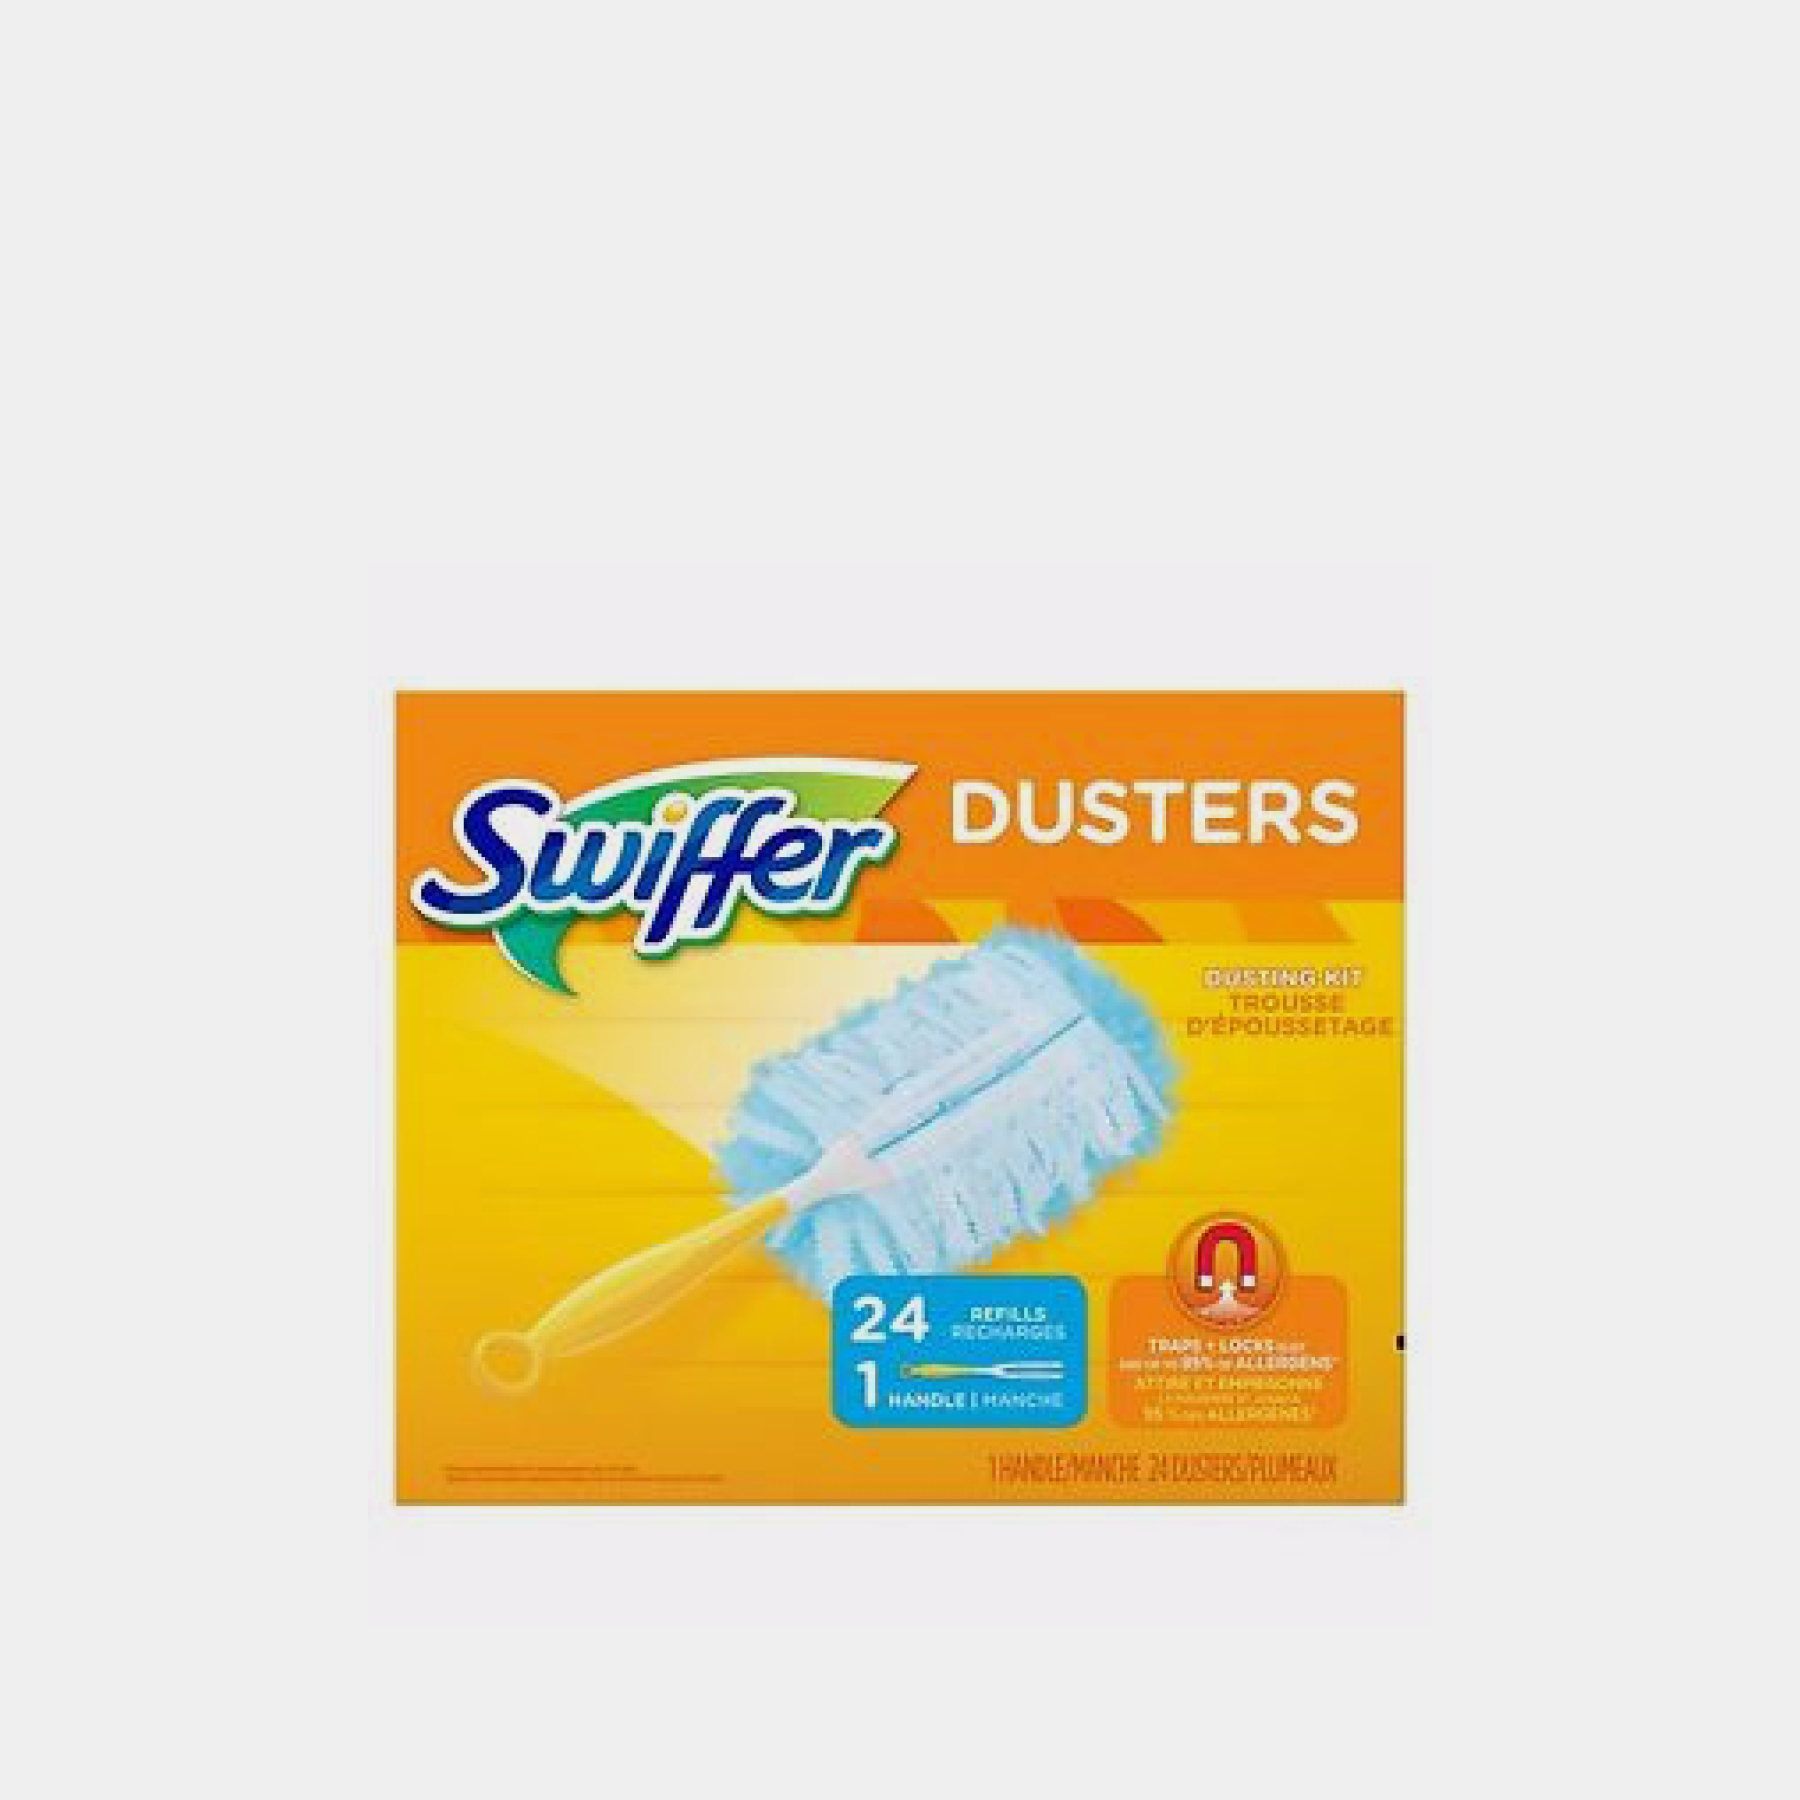 ALL-SORTS-OF-SWIFFER-DUSTERS